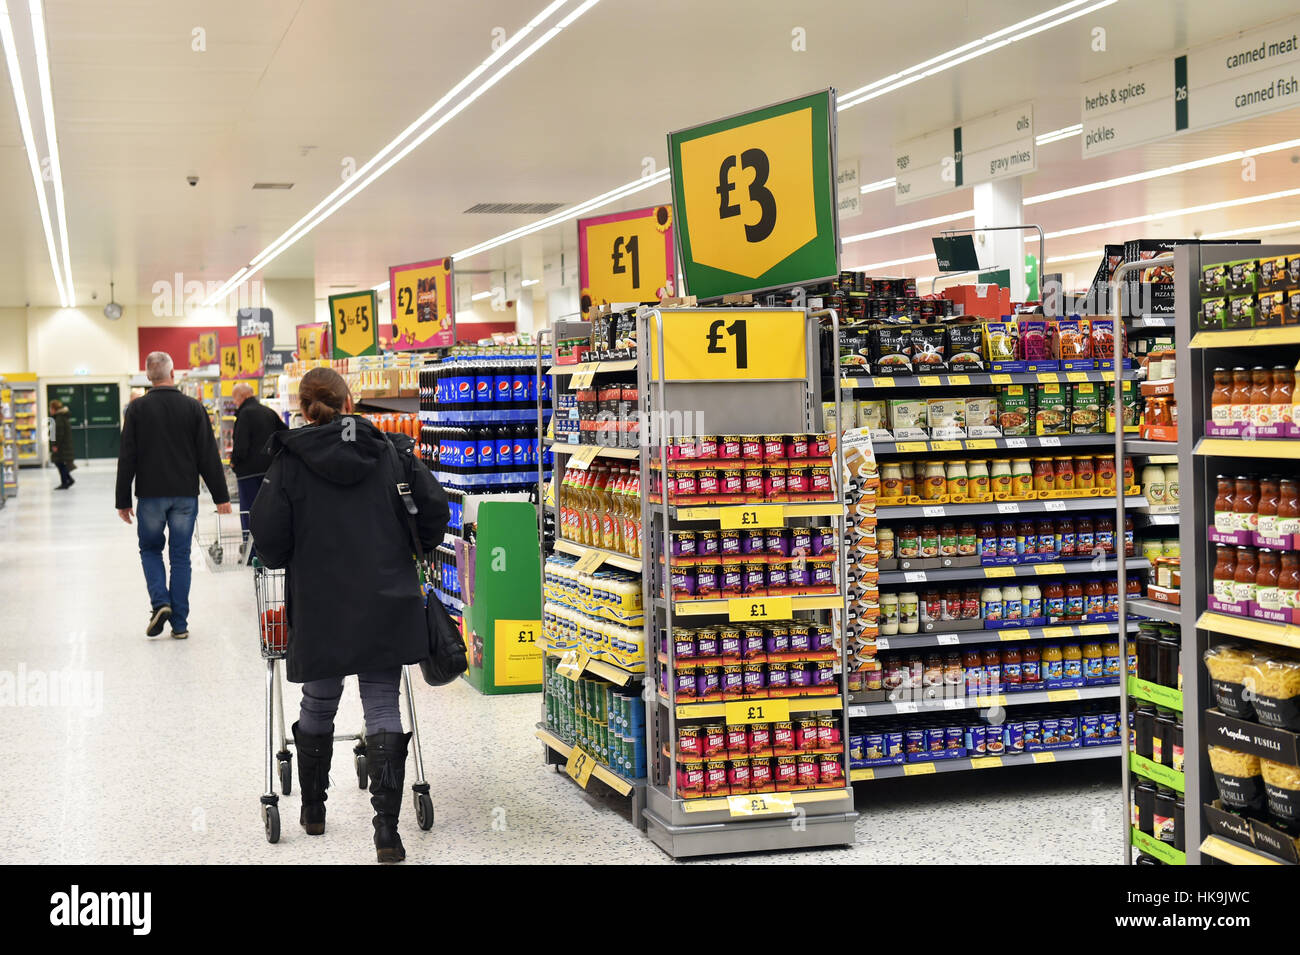 Customers shopping in a supermarket, shoppers browse the aisles Stock Photo